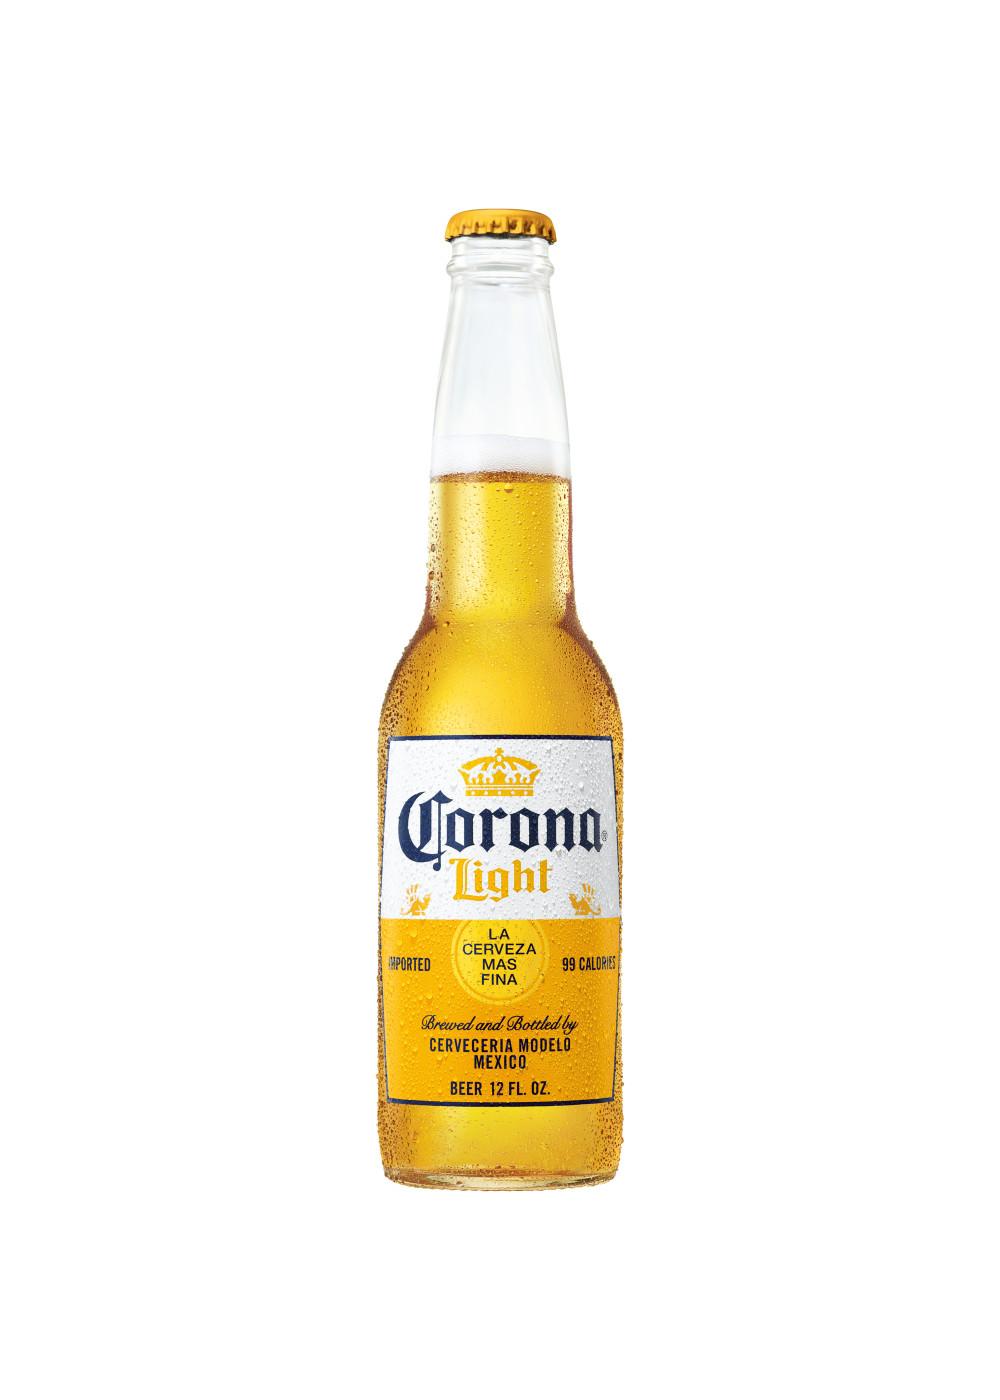 Corona Light Mexican Lager Beer Bottle; image 1 of 3